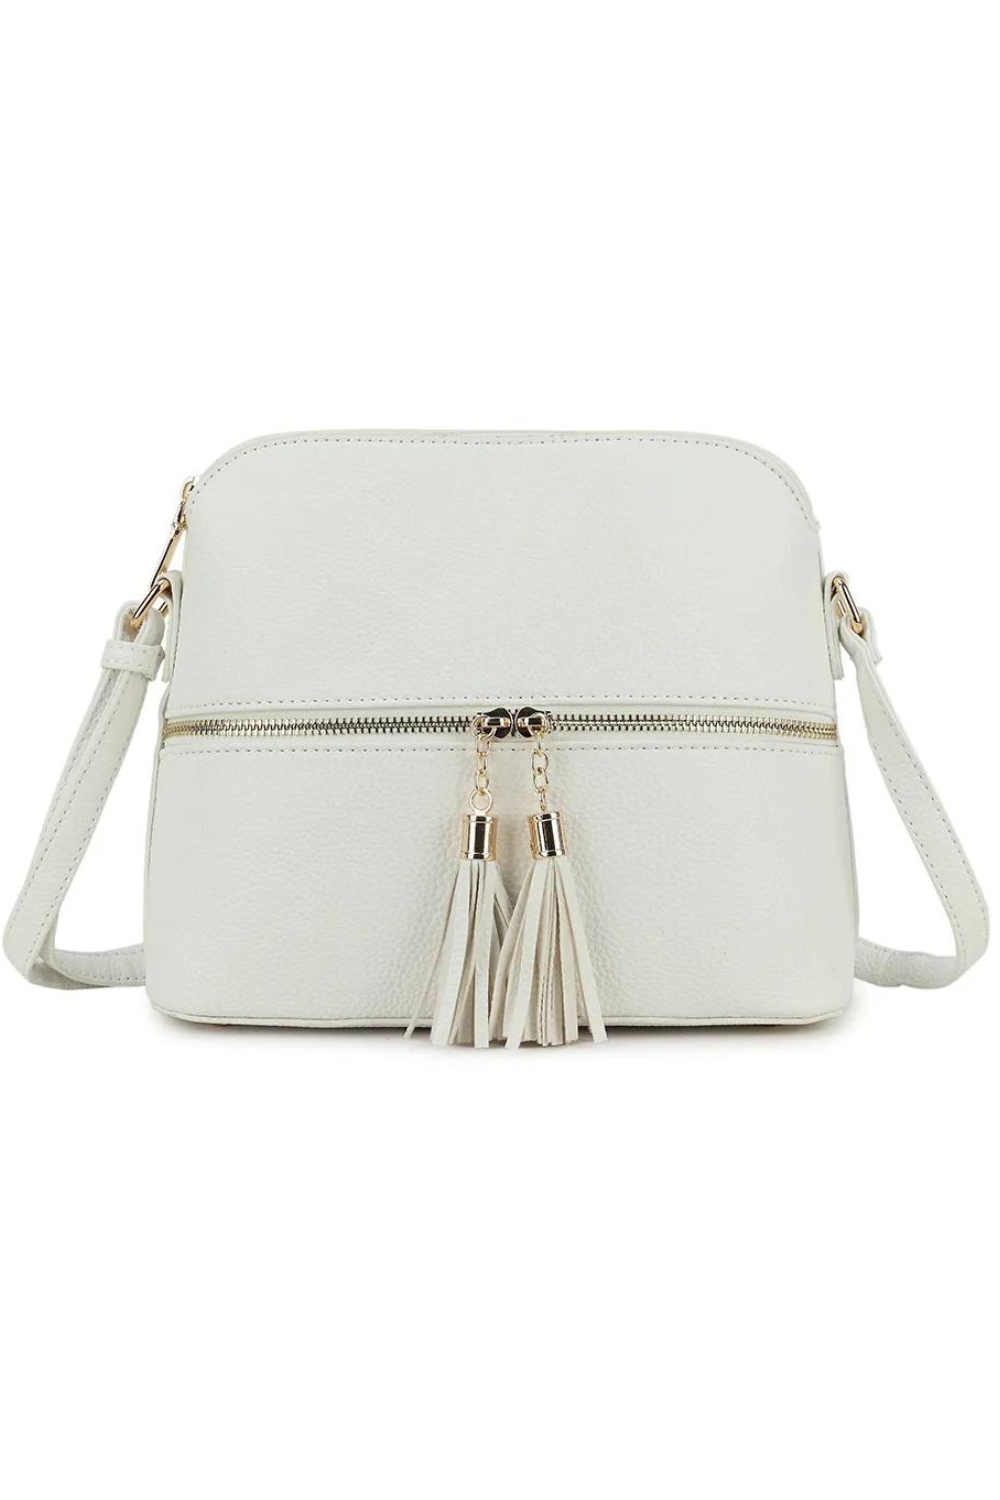 BREEZE CROSSBODY BAG WITH TASSEL AND ZIP DETAIL IN WHITE FAXU LEATHER